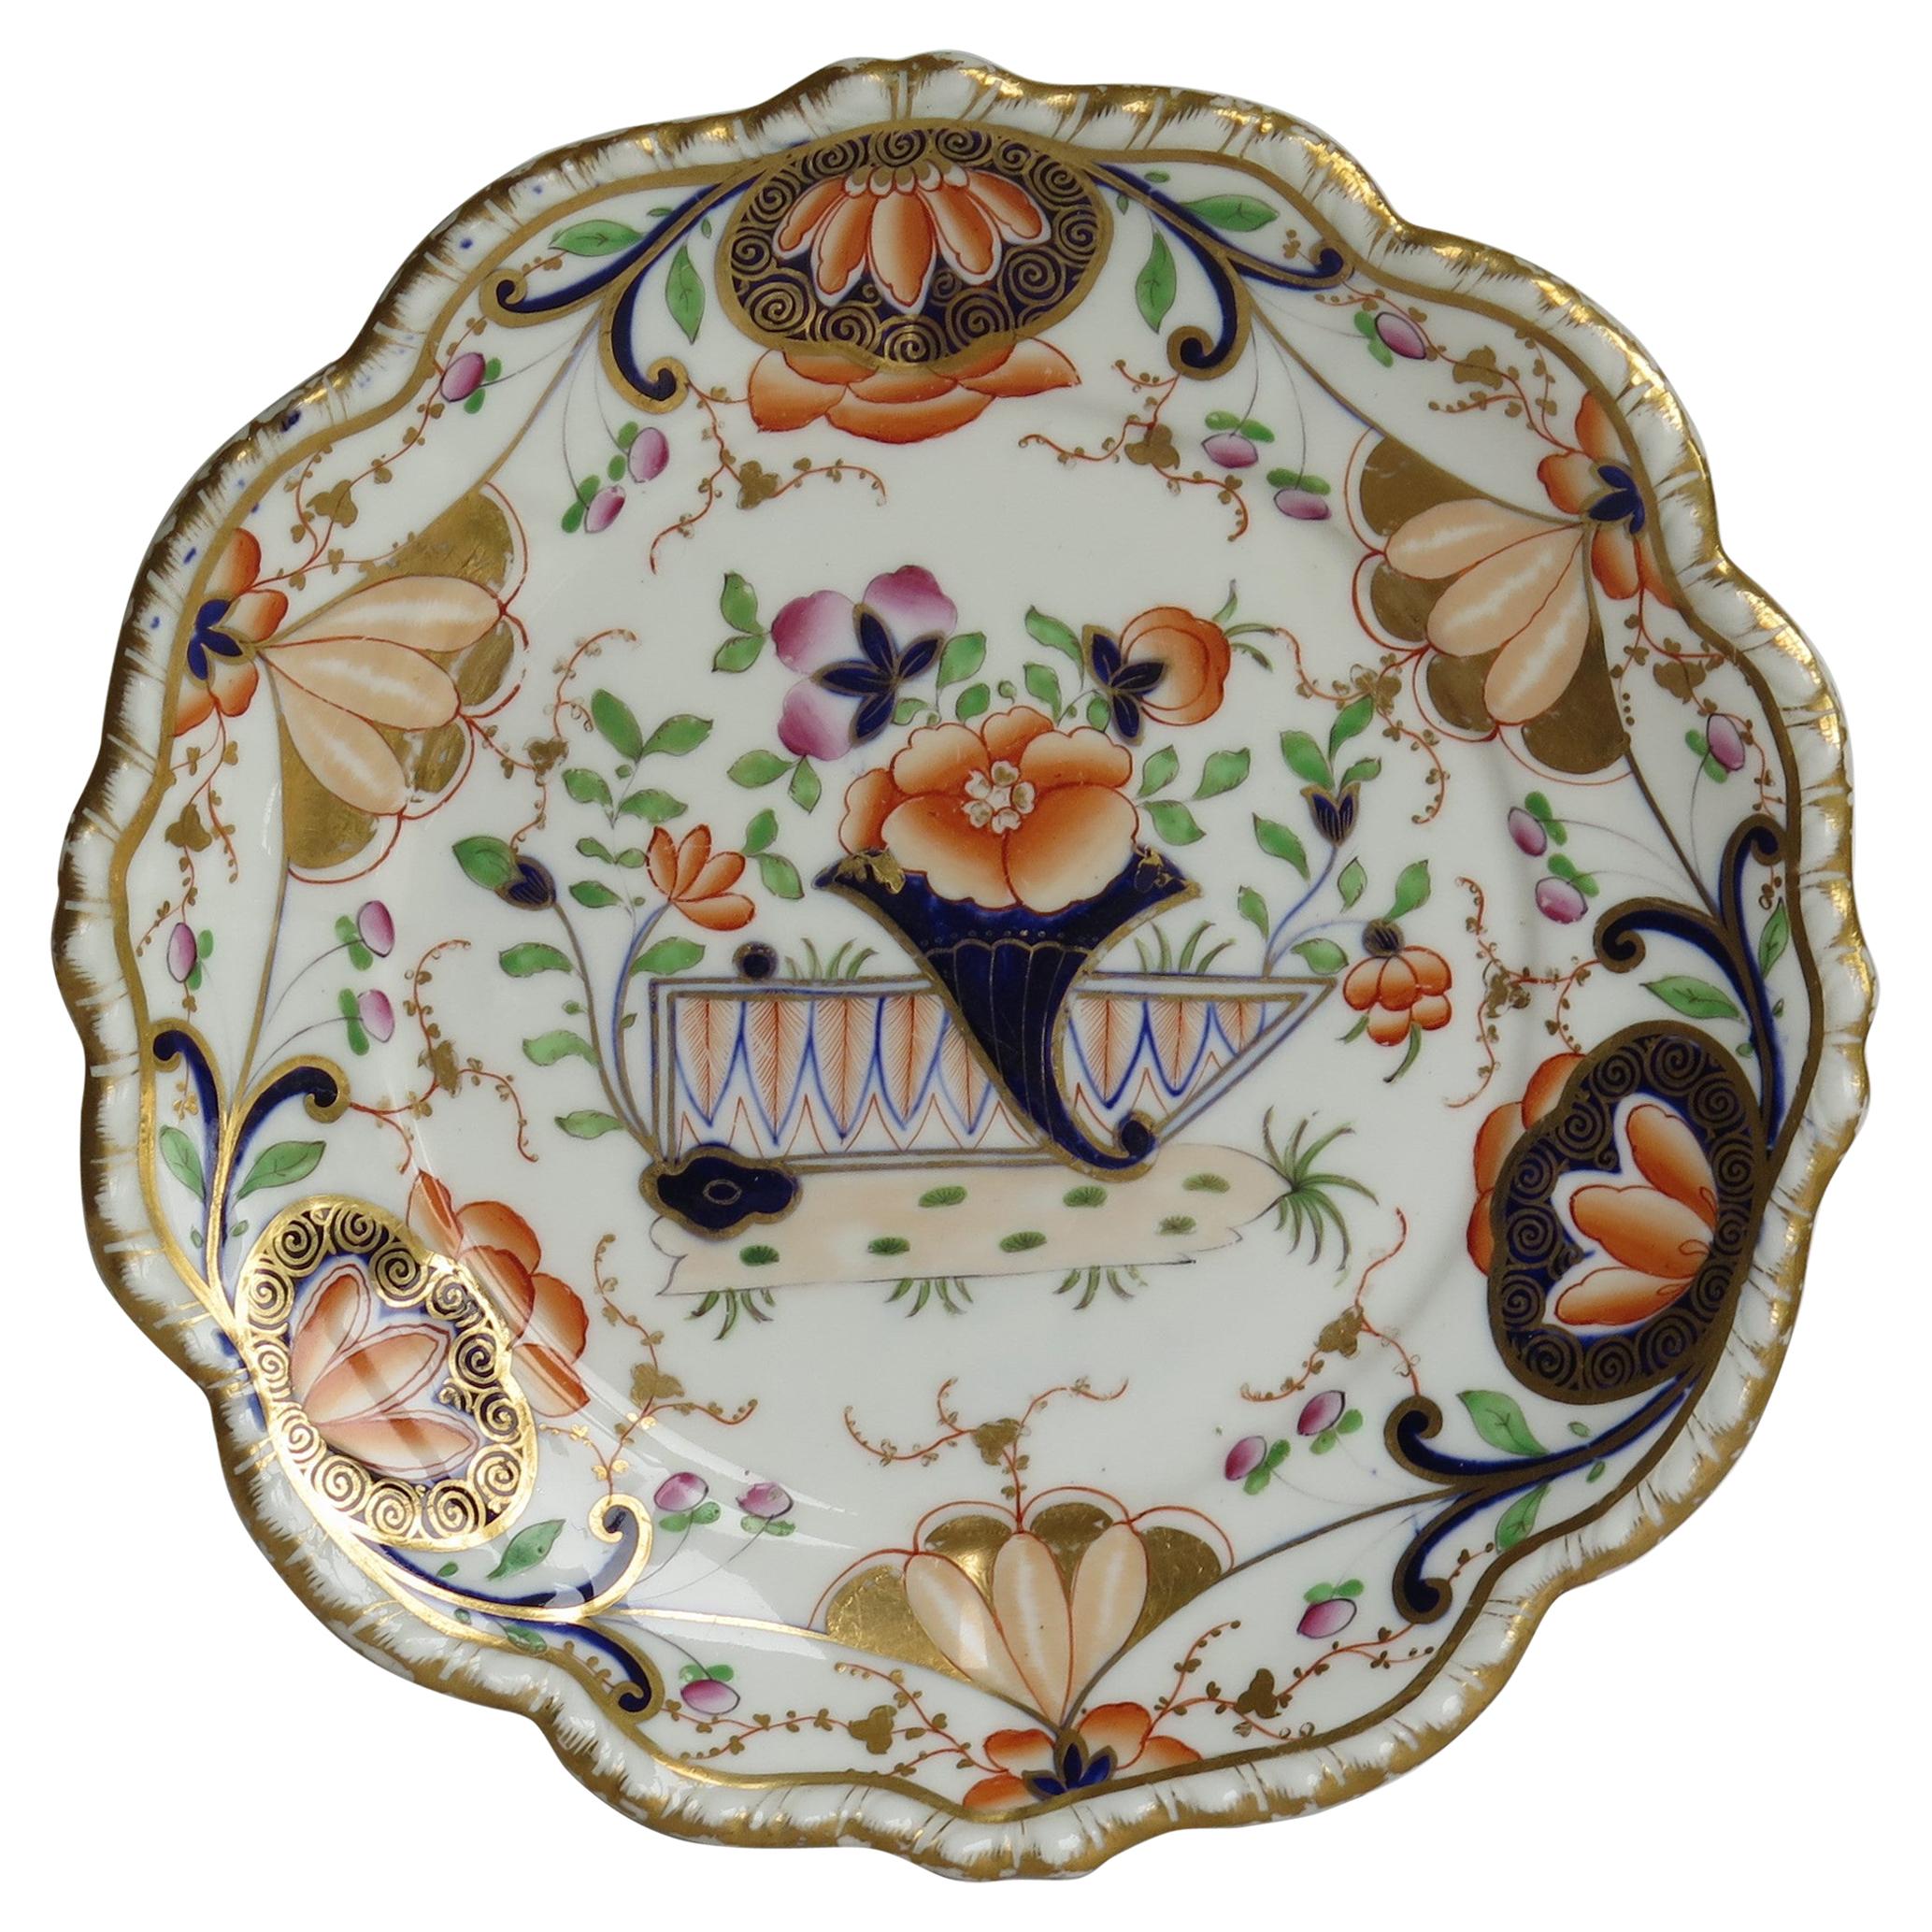 Early 19th Century Desert Dish Porcelain finely Hand Painted, Staffordshire, UK